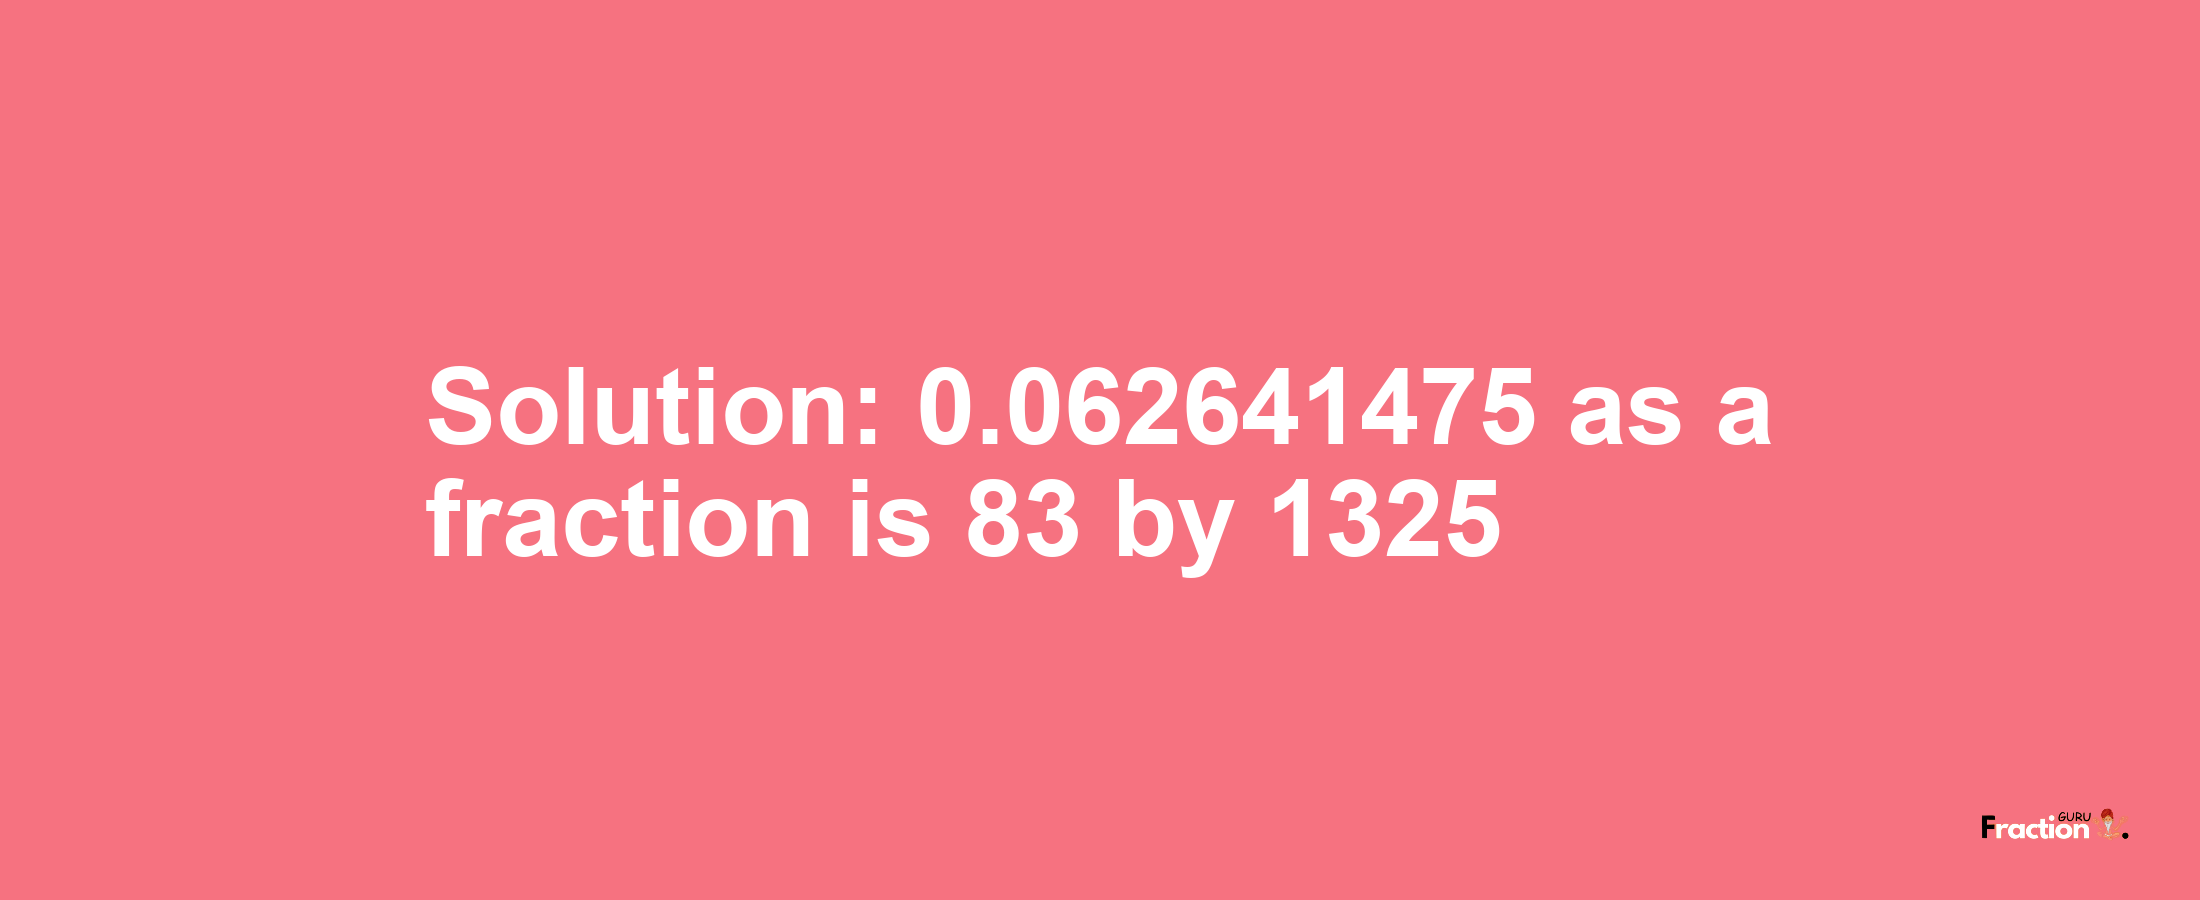 Solution:0.062641475 as a fraction is 83/1325